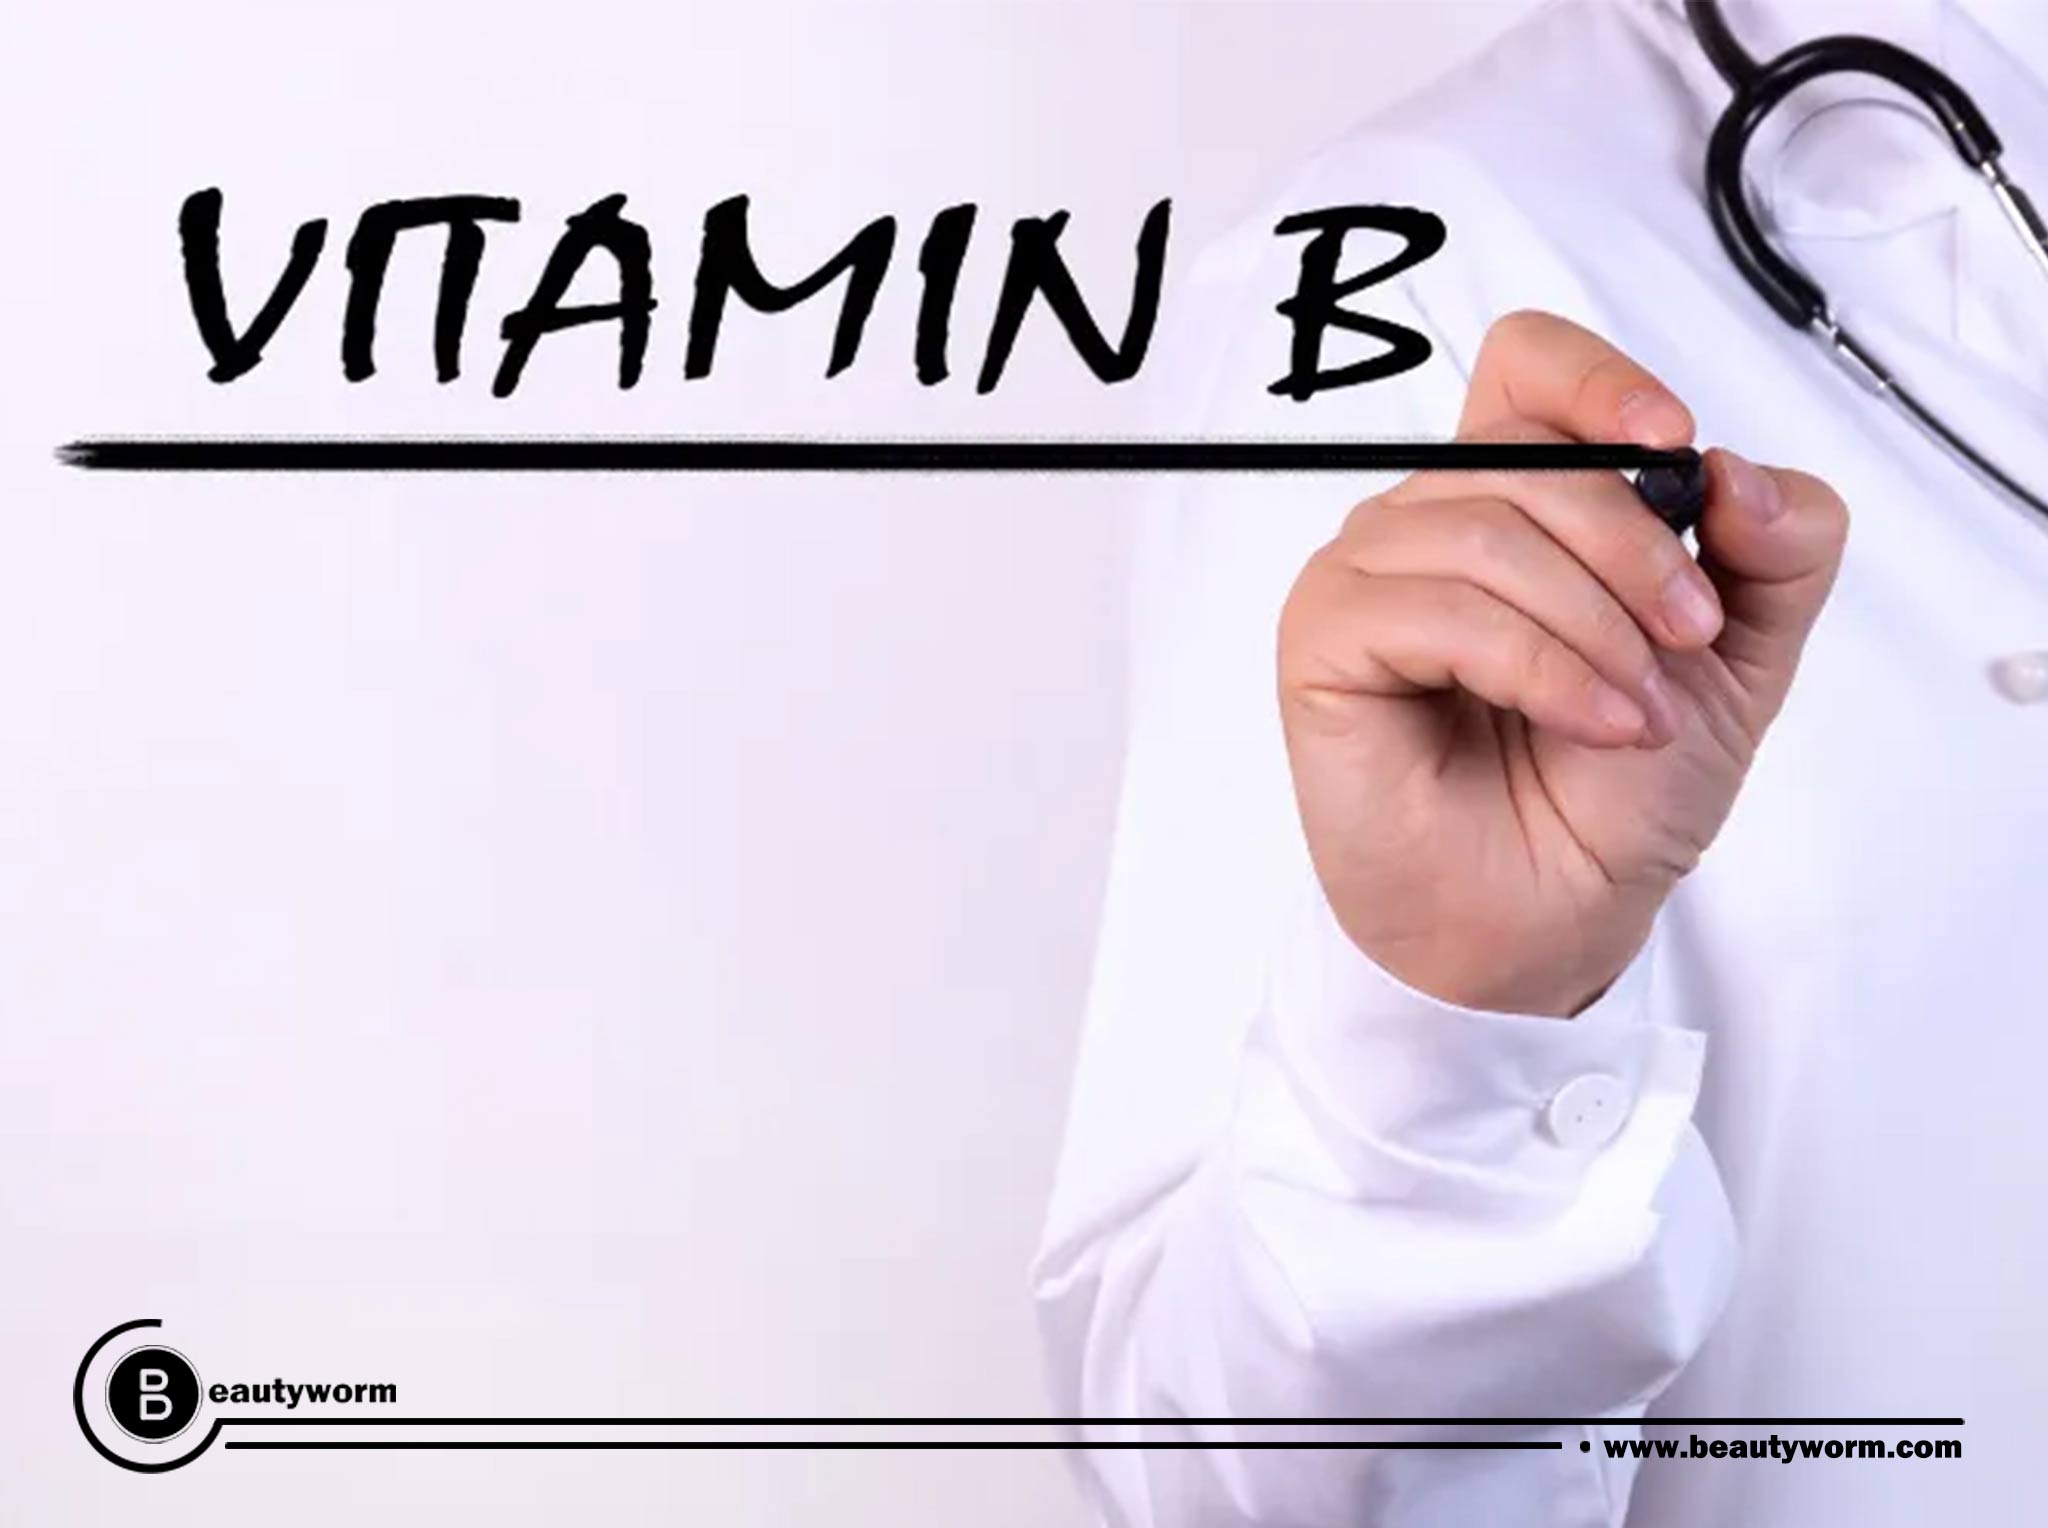 What are the benefits of B vitamins?